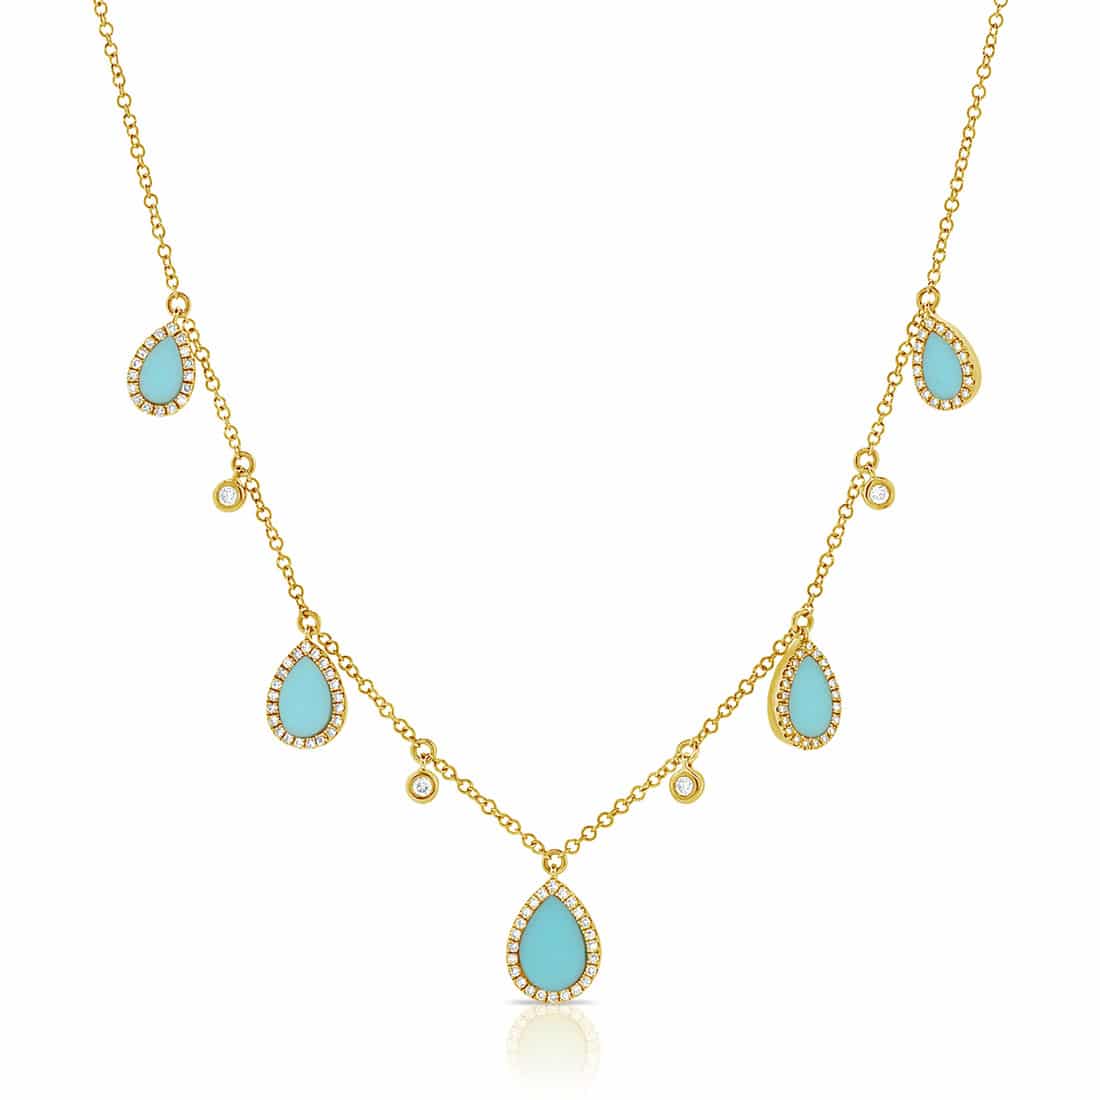 Buy the Yellow Turquoise Stone Necklace on Gold Chain | JaeBee Jewelry